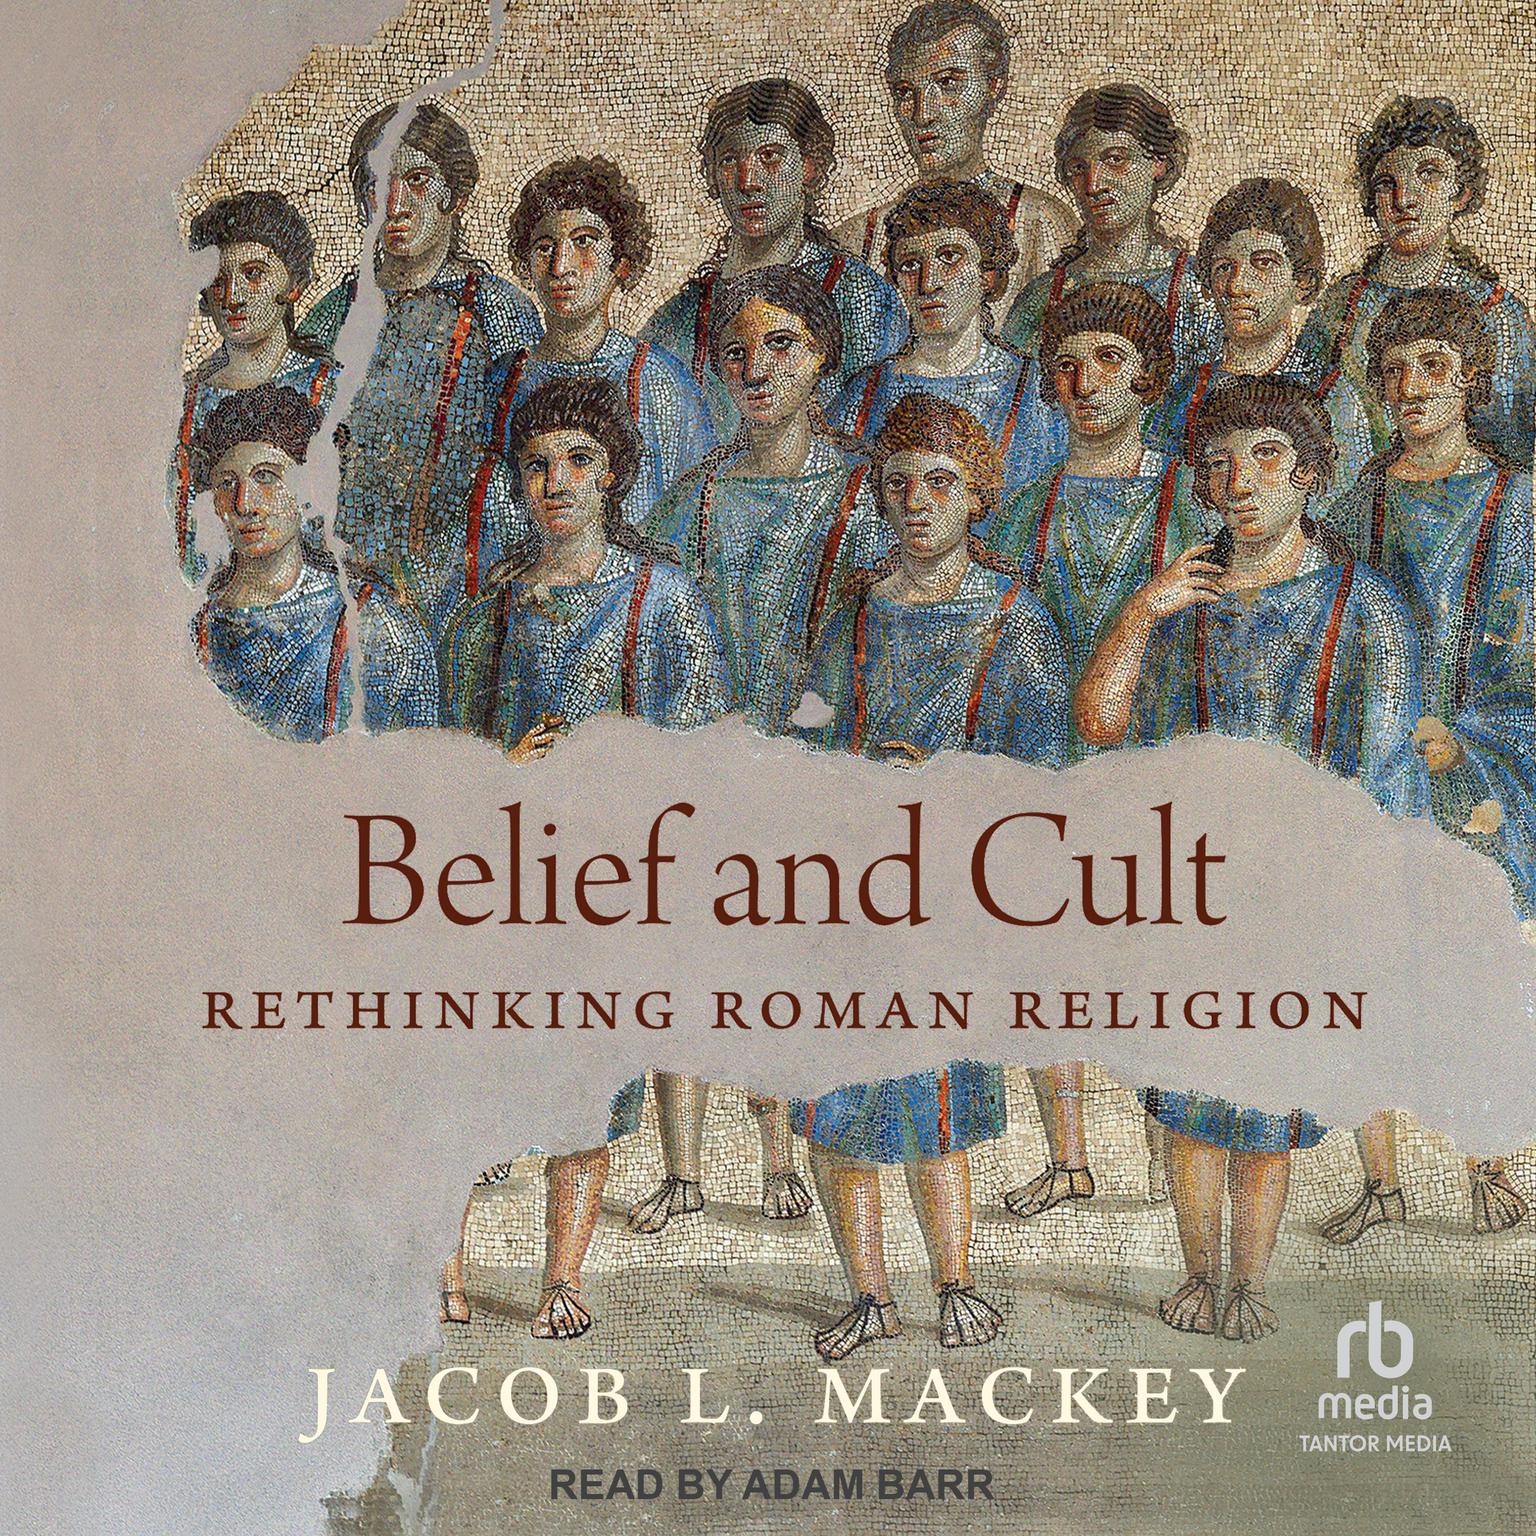 Belief and Cult: Rethinking Roman Religion Audiobook, by Jacob L. Mackey